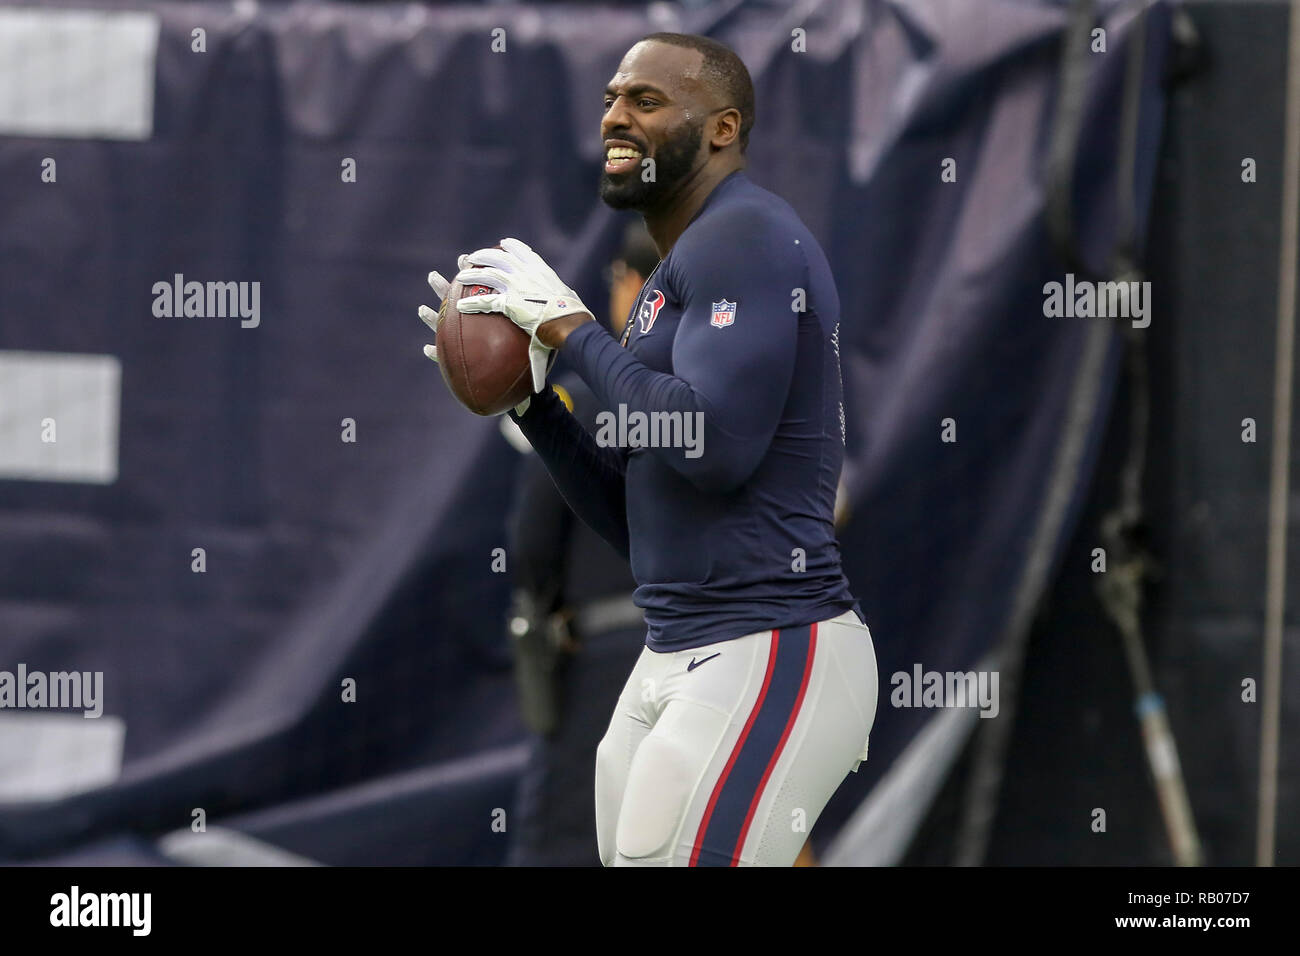 Houston, TX, USA. 5th Jan, 2019. Houston Texans outside linebacker Whitney Mercilus (59) smiles while throwing a ball during warmups before the start of the game against the Indianapolis Colts during the AFC Wildcard game at NRG Stadium in Houston, TX. John Glaser/CSM/Alamy Live News Stock Photo